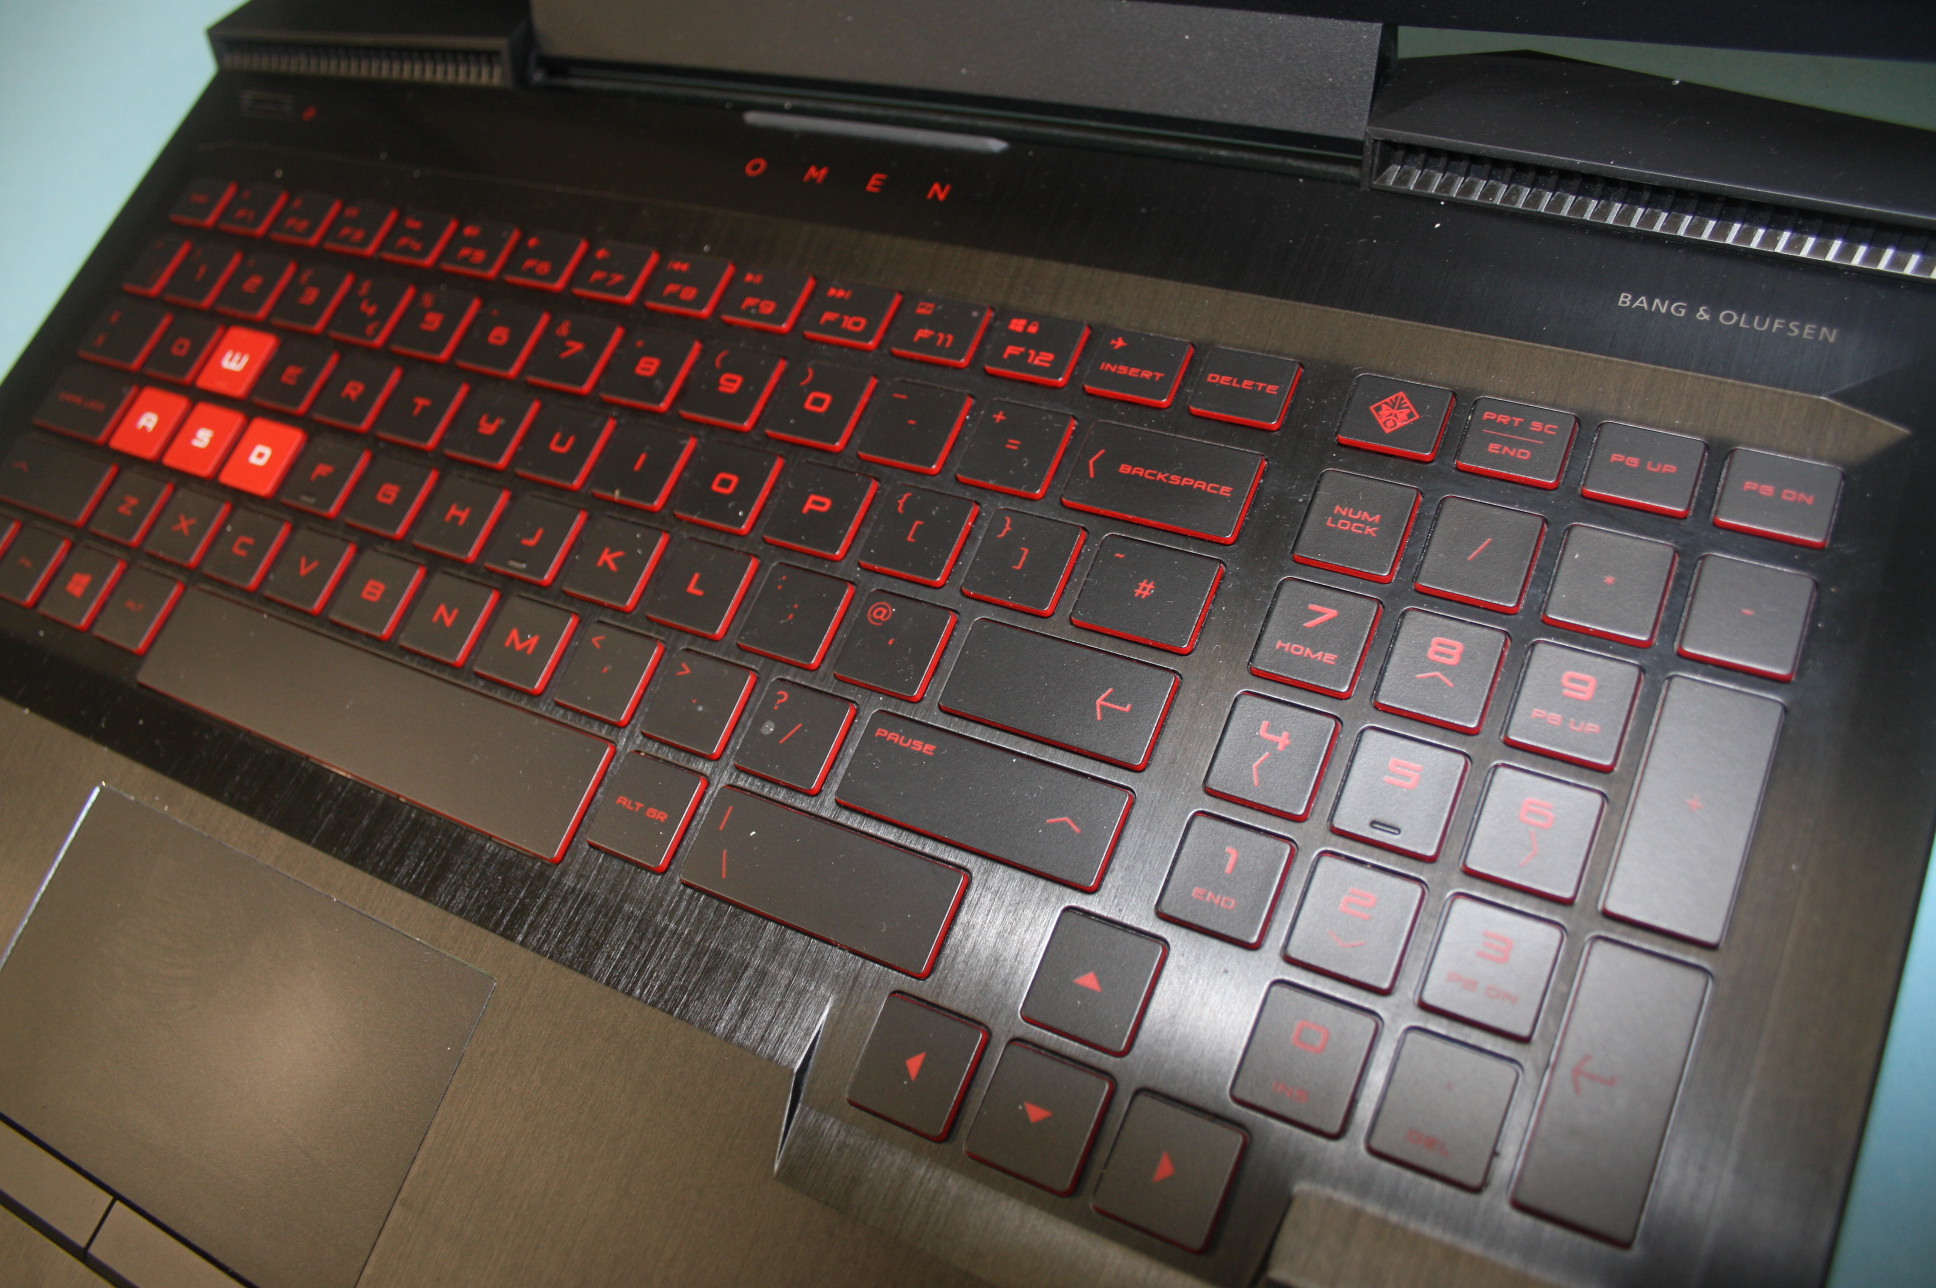 Omen laptop (a/f) - Image 2 of 3